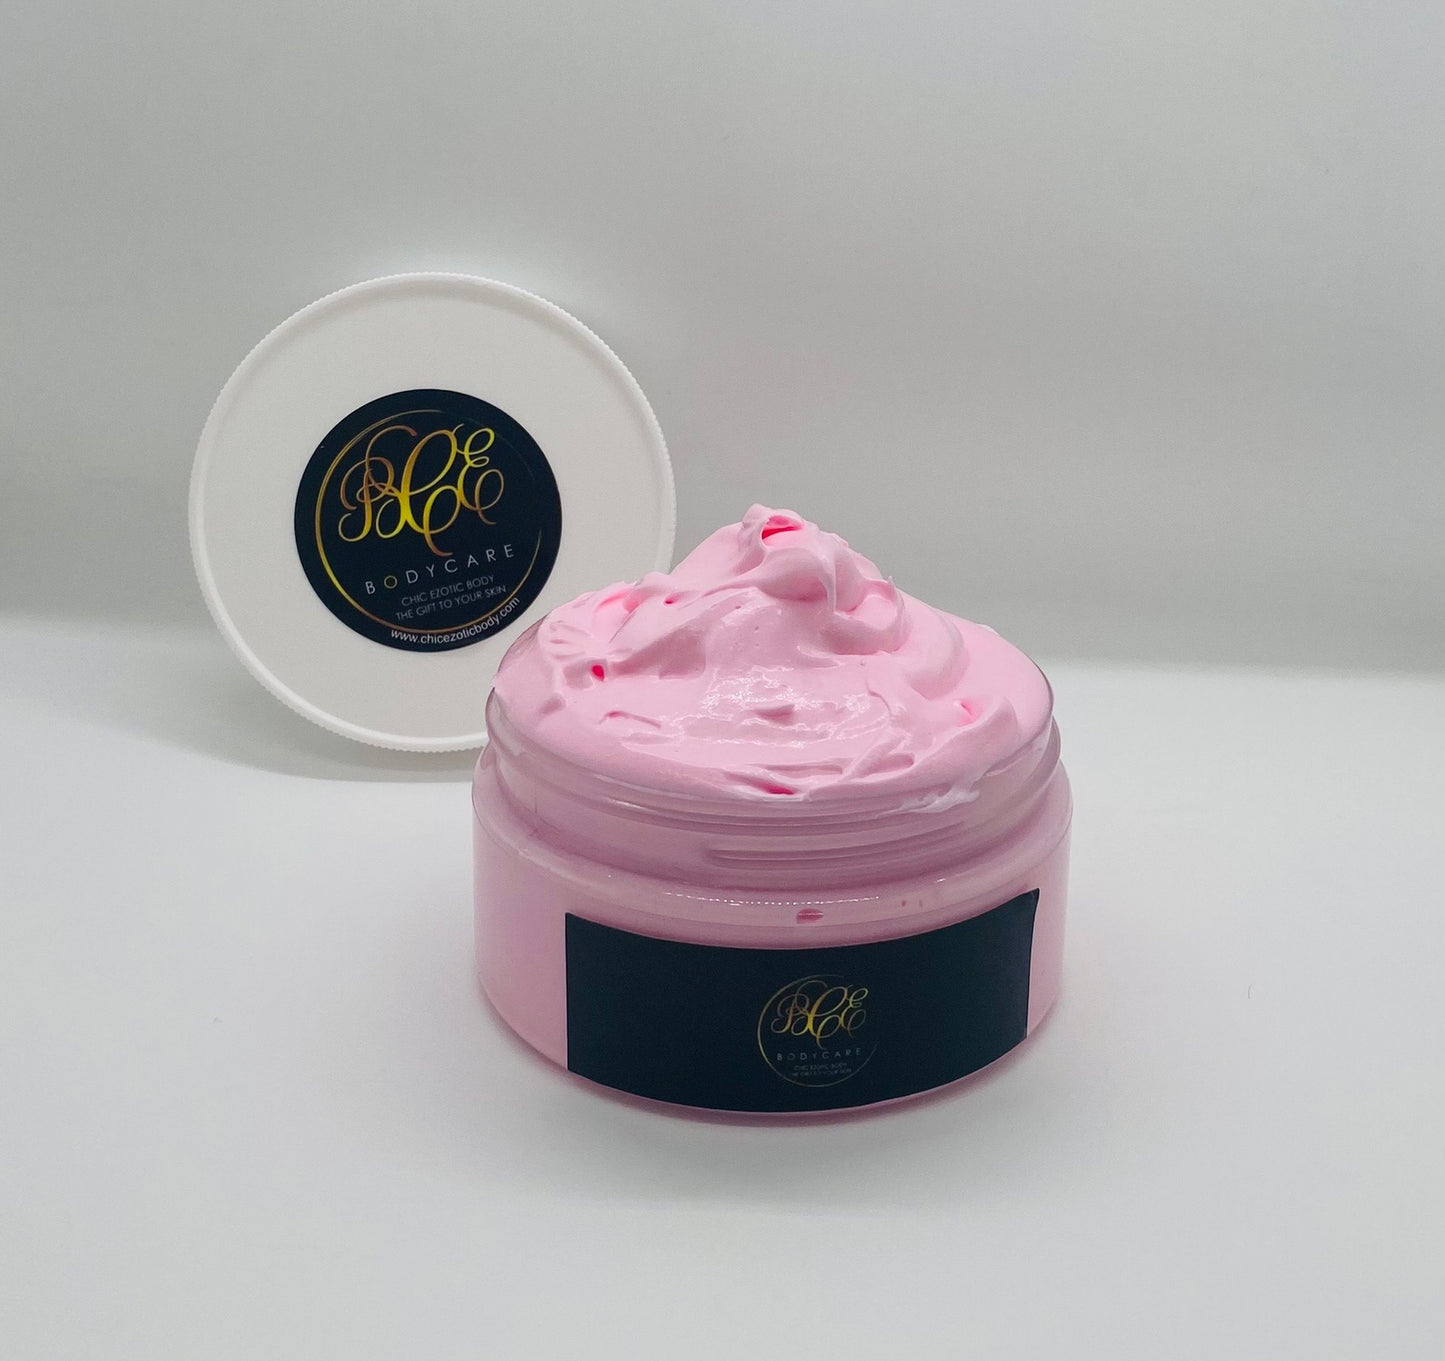 Chic Ezotic Body Attracted  handmade whipped Gourmet Shea Butter  (Women)